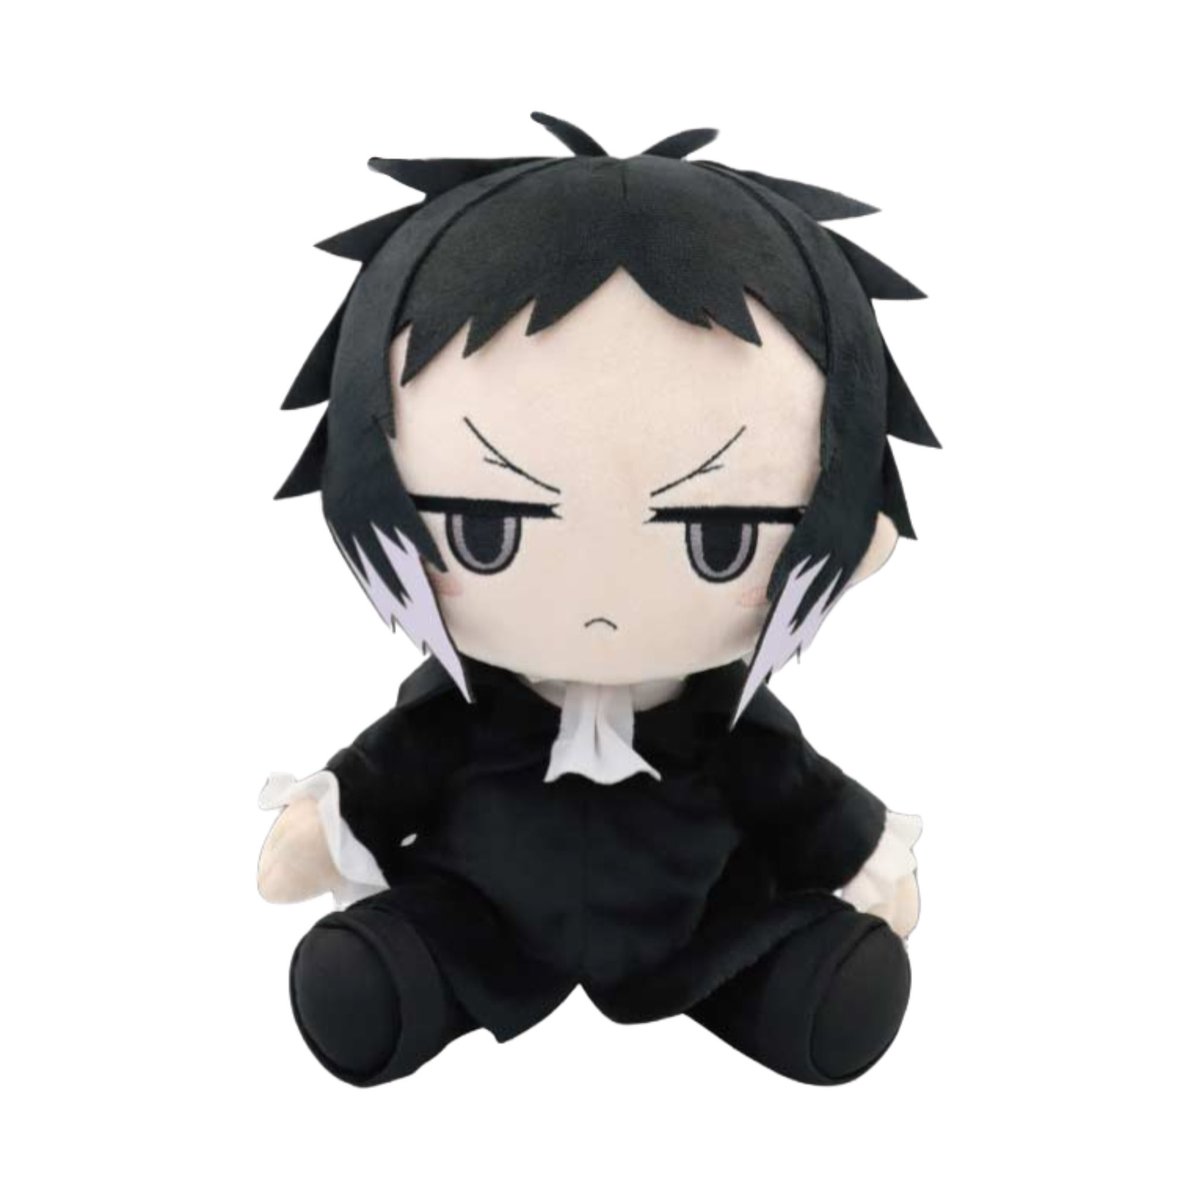 “you better not be that giant grumpy akutagawa plush when i get there”

me: